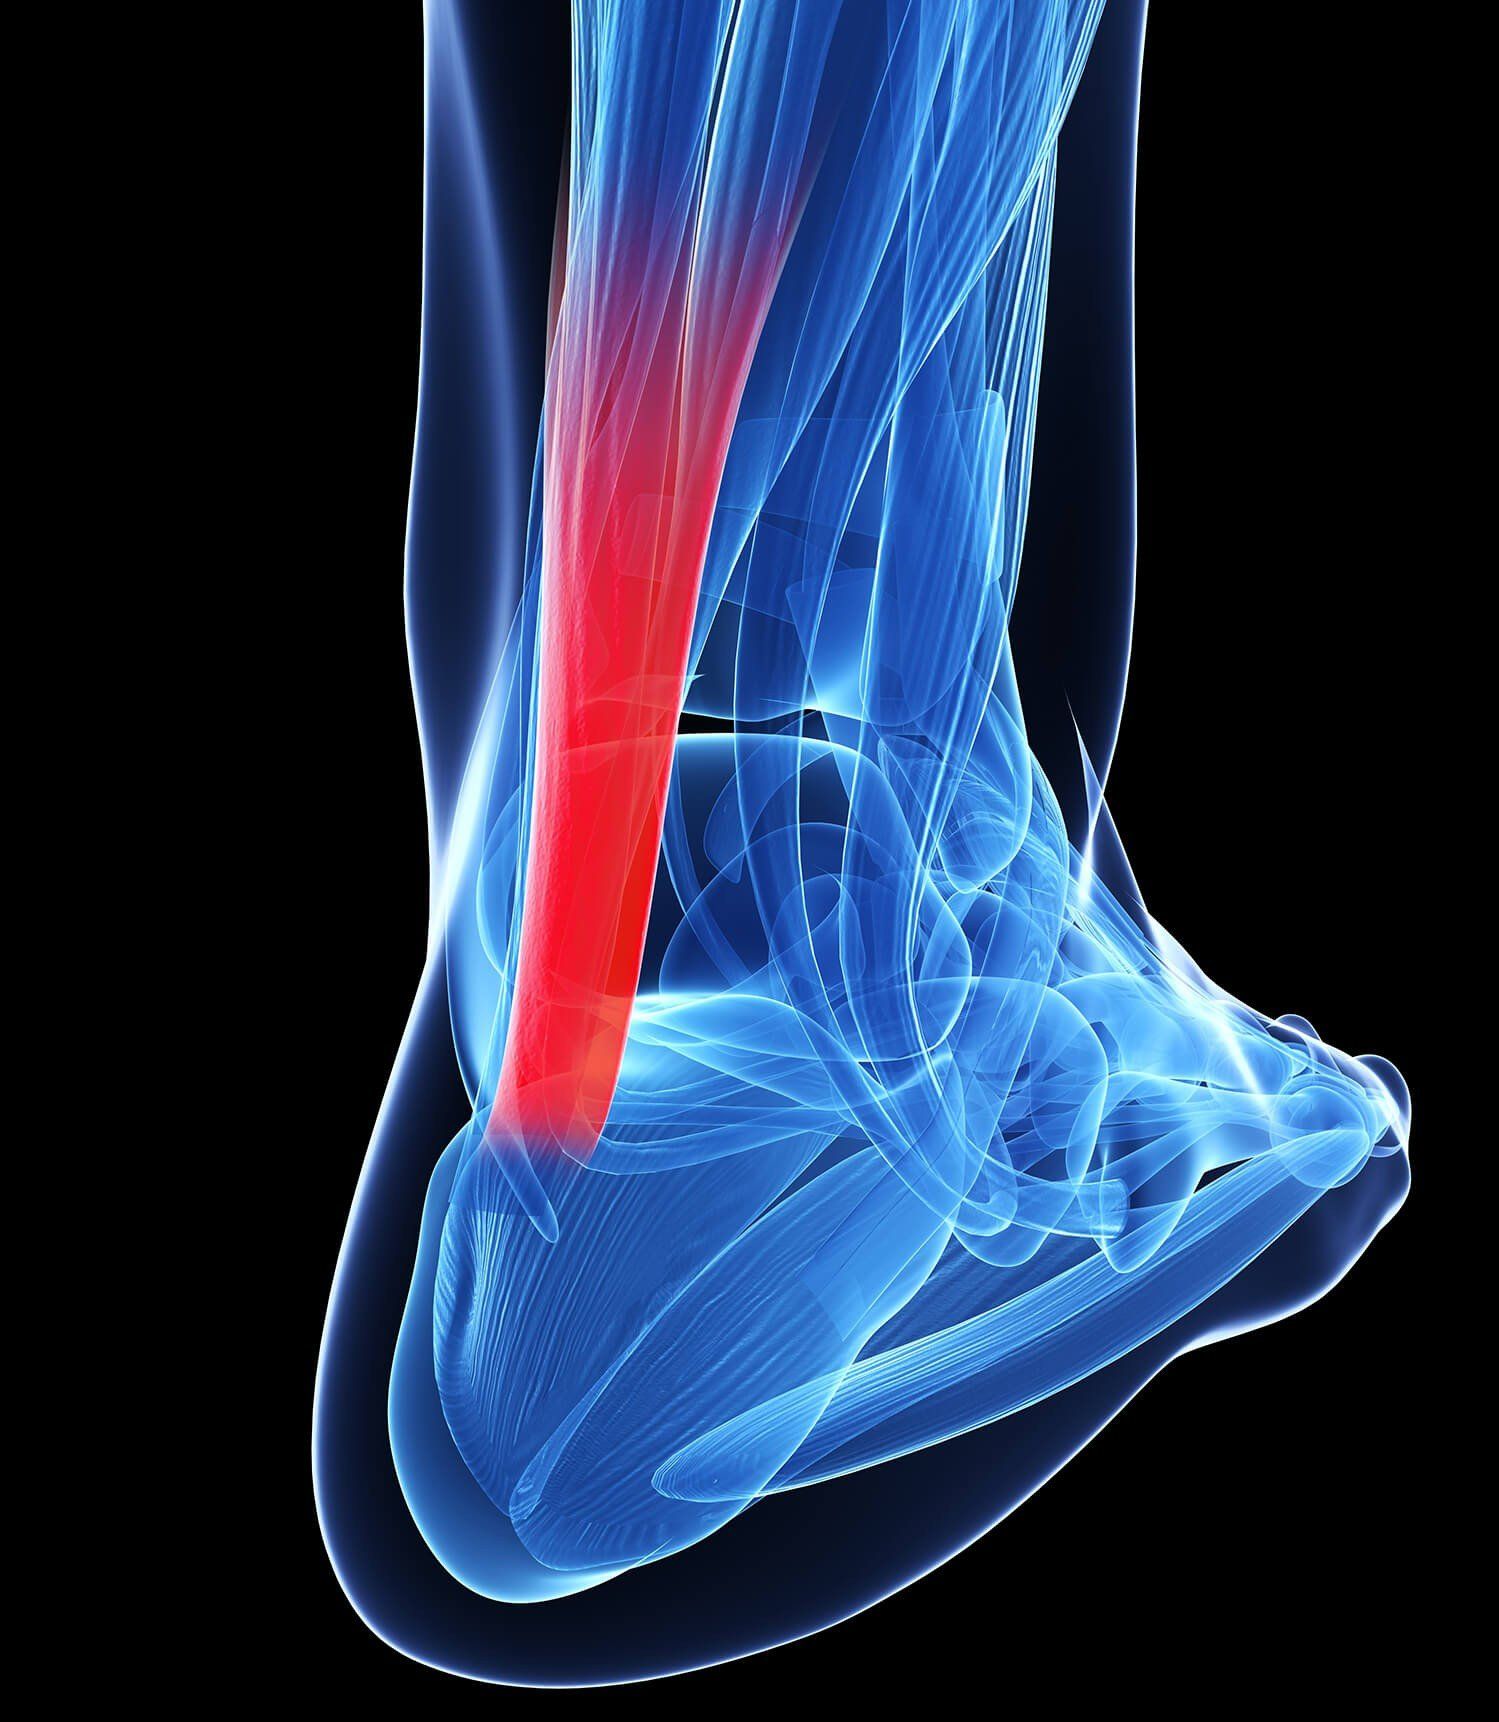 Physical Therapists Guide to Peroneal Tendinopathy